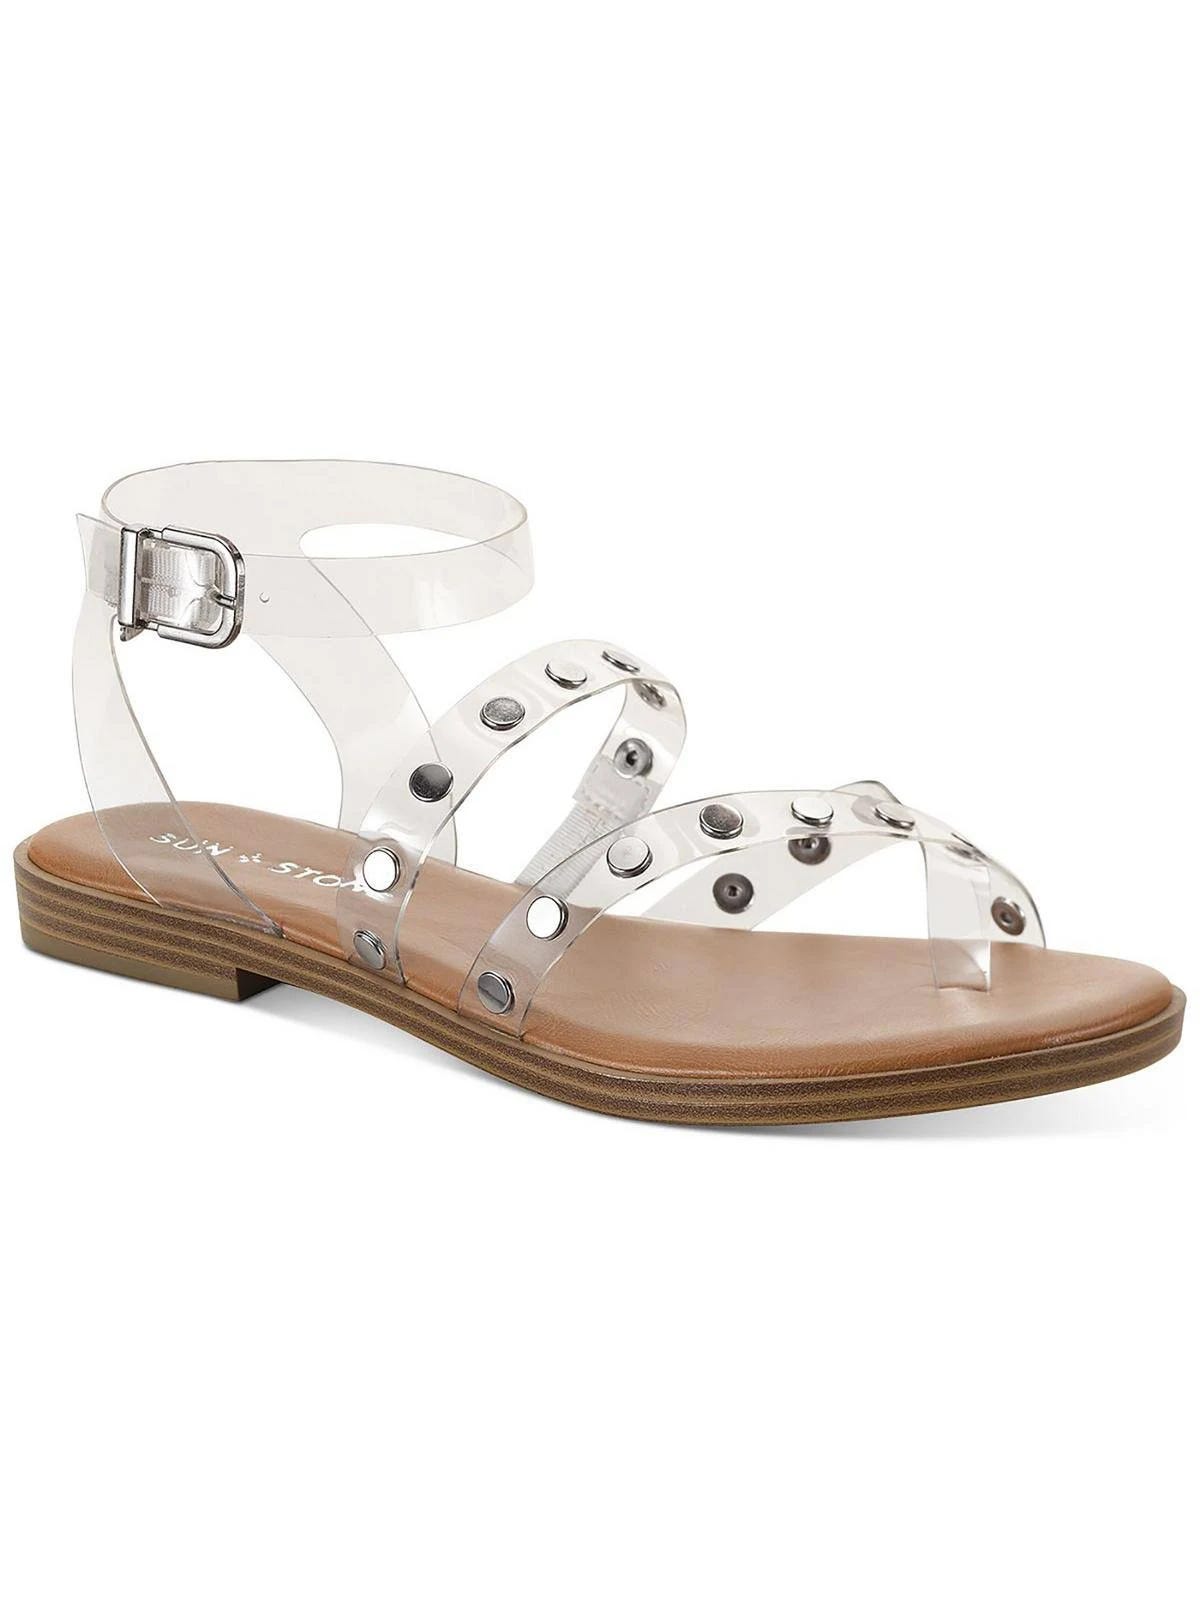 Studleyy Clear Flat Thong Sandal for Summer | Image